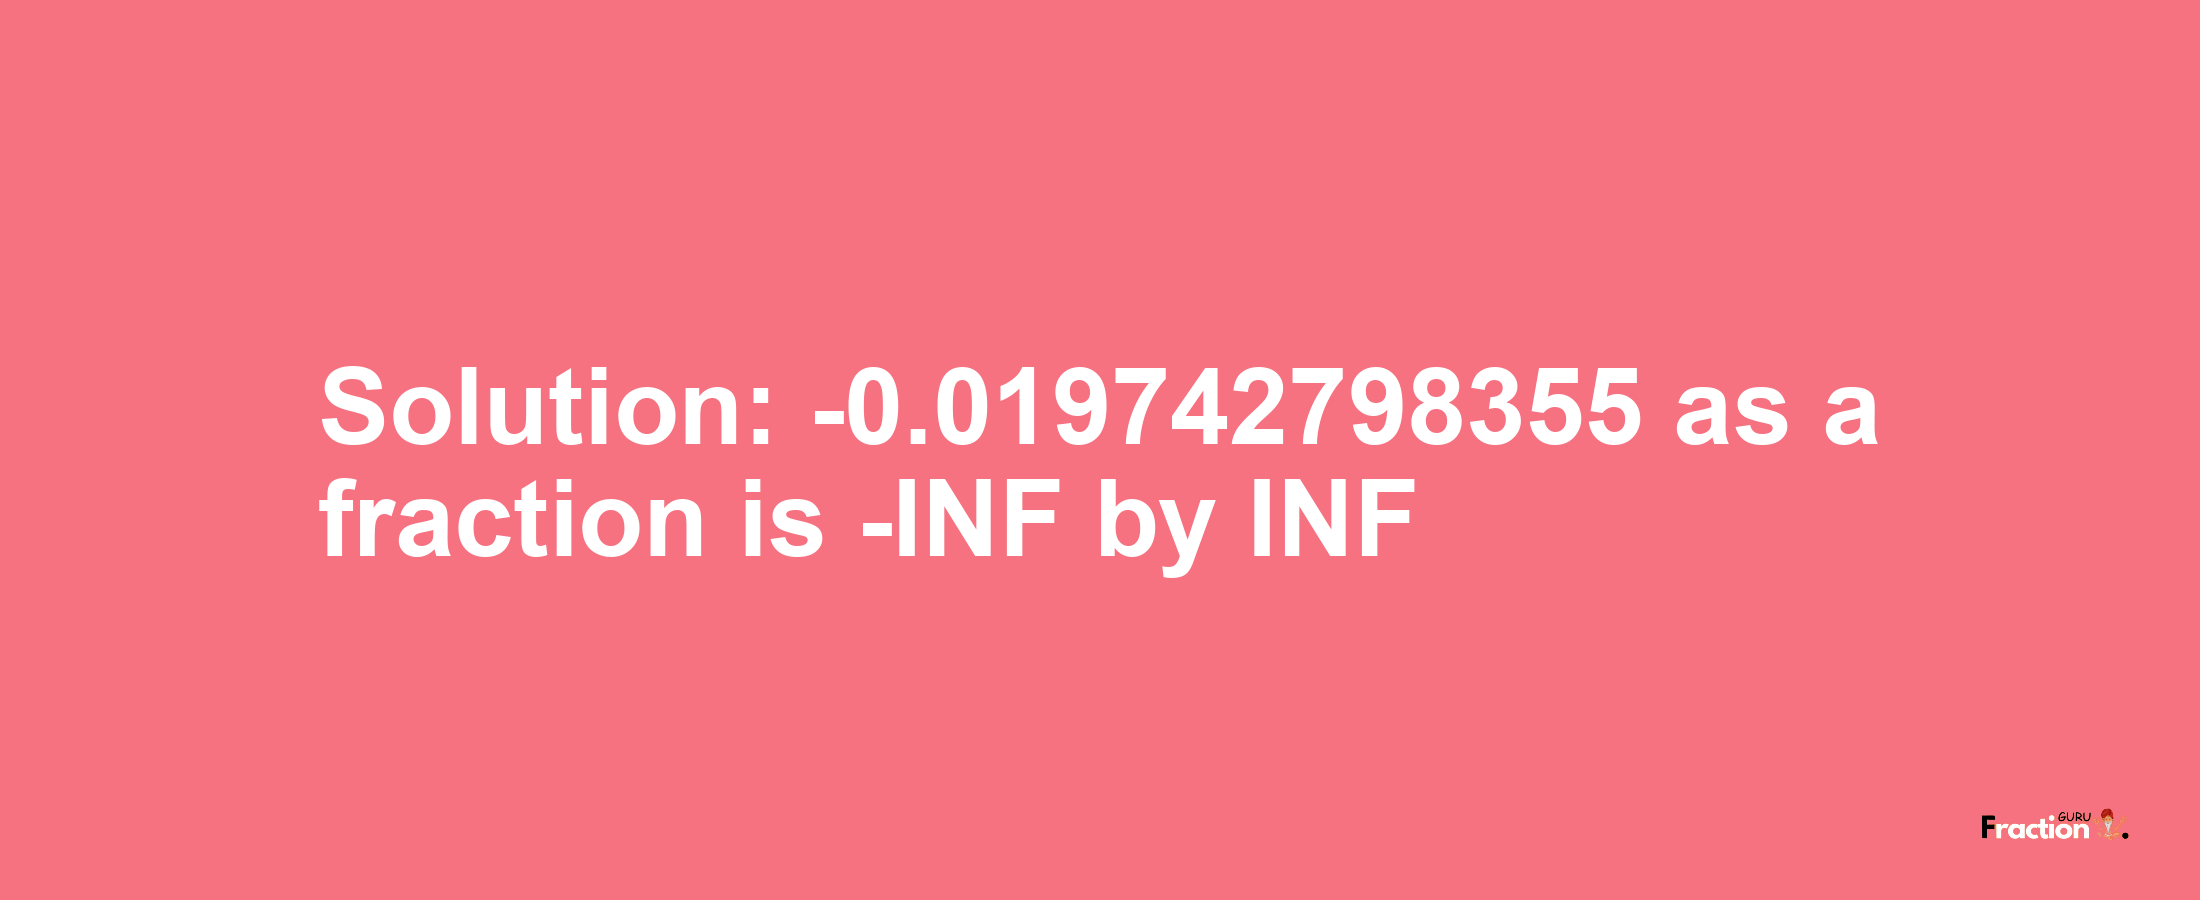 Solution:-0.019742798355 as a fraction is -INF/INF